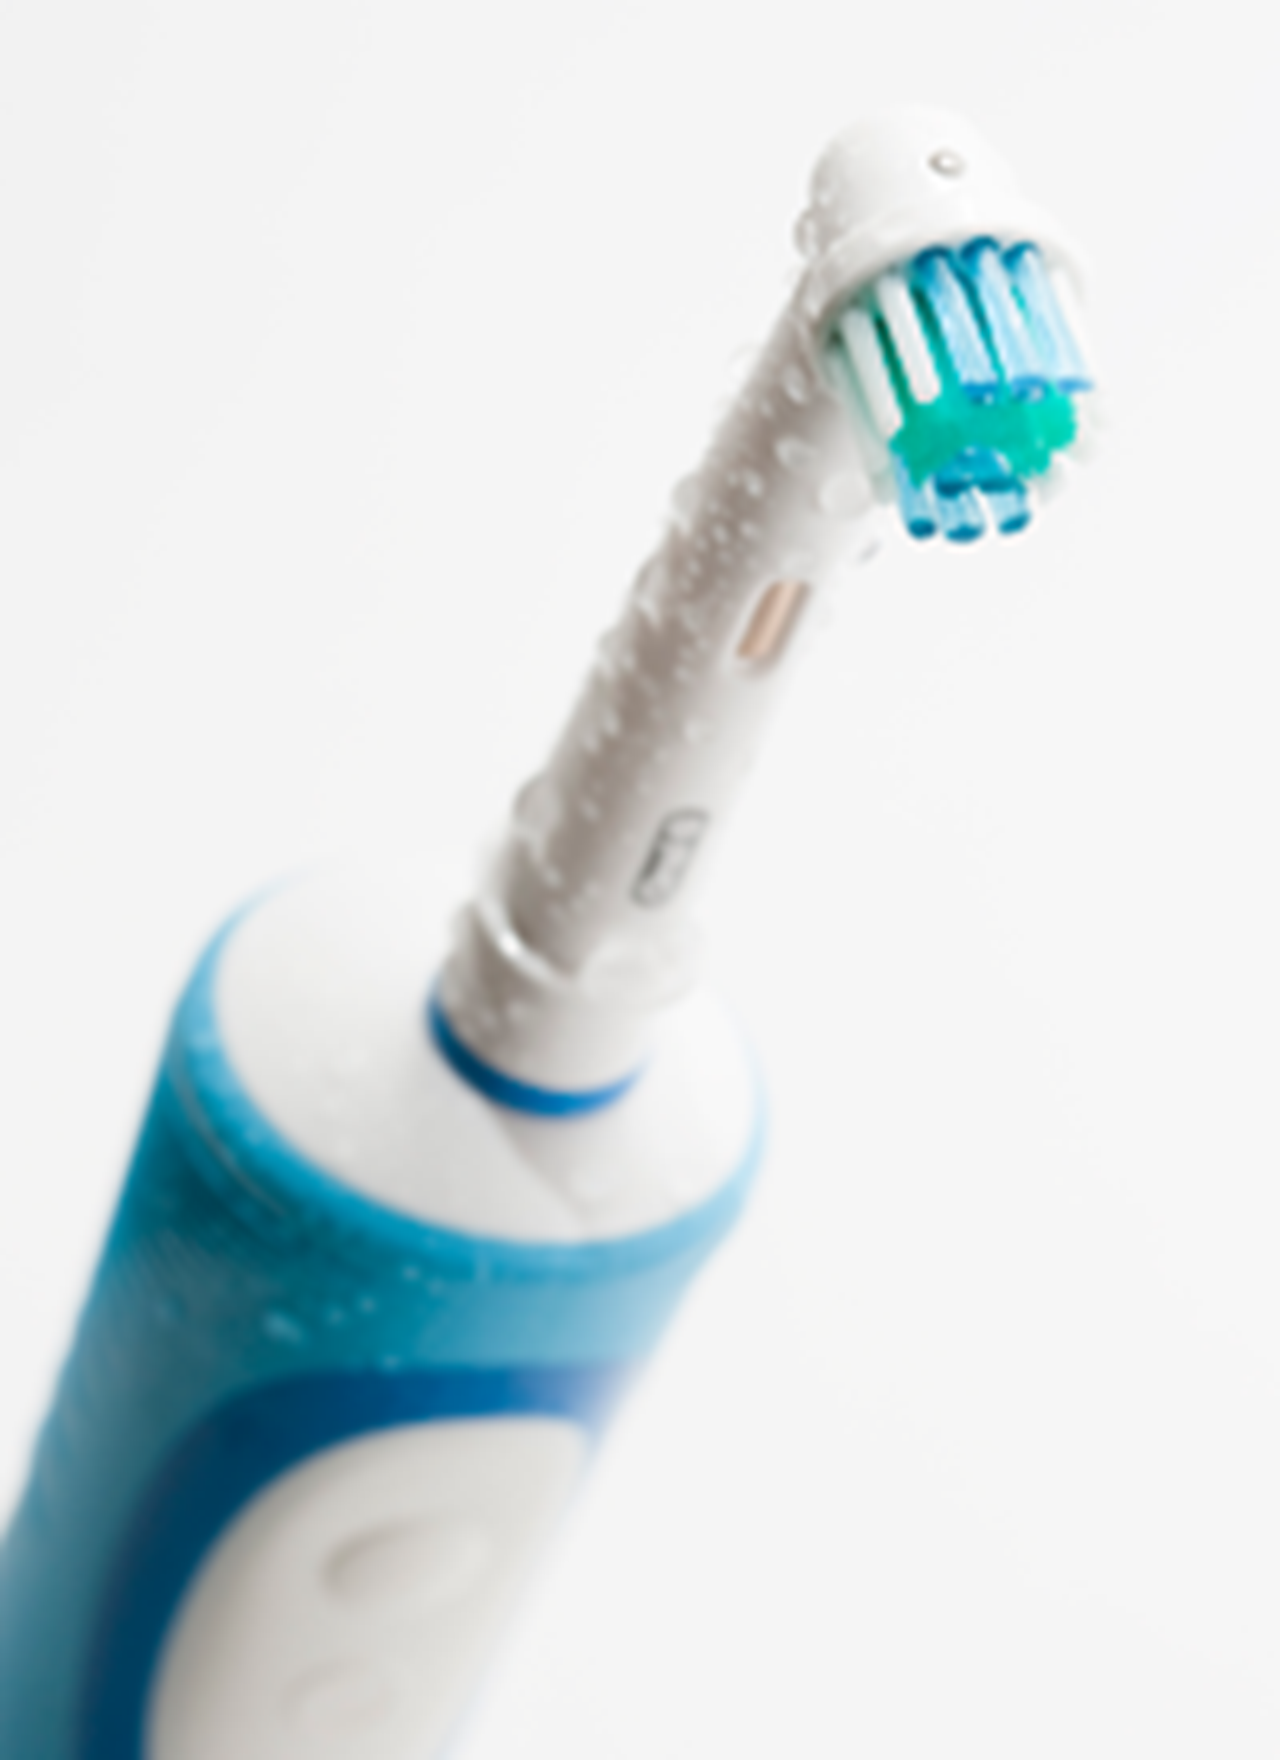 Image of electric toothbrush